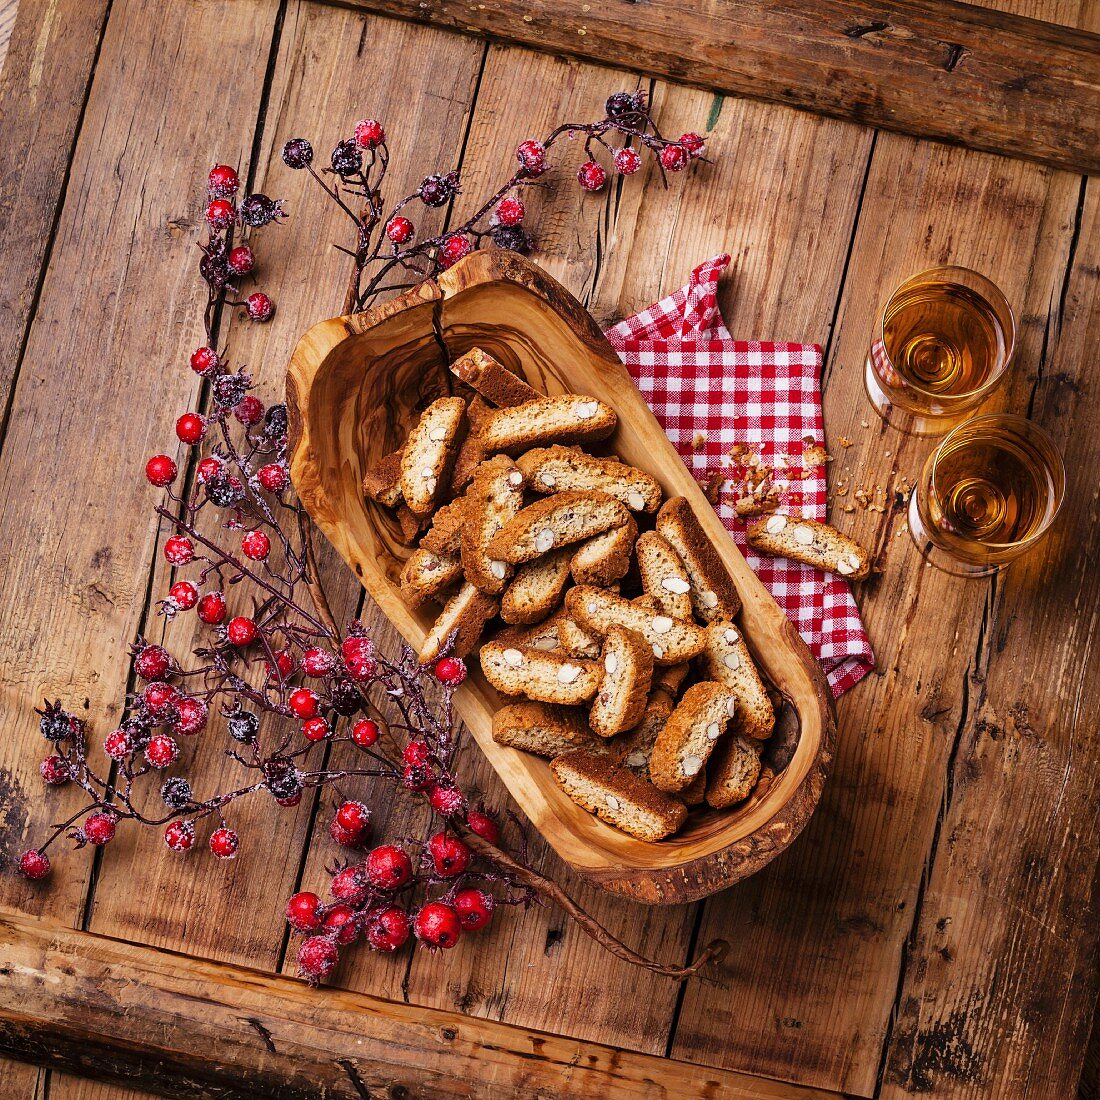 Cantucci in olive wood bowl on wooden background